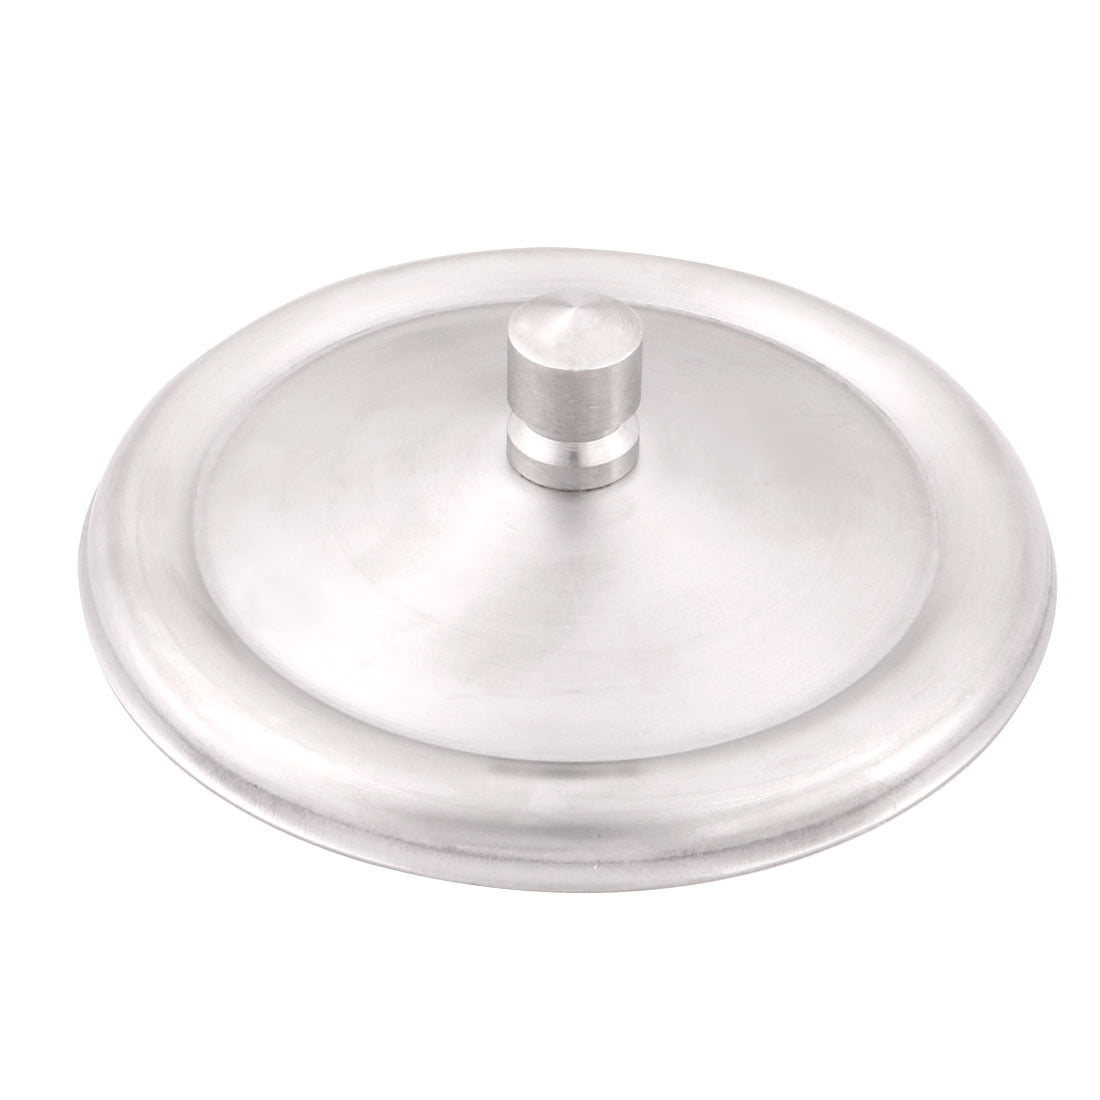 Stainless Steel 10.5cm Dia Round Shape Airtight Drink Mug Cup Lid Cover 